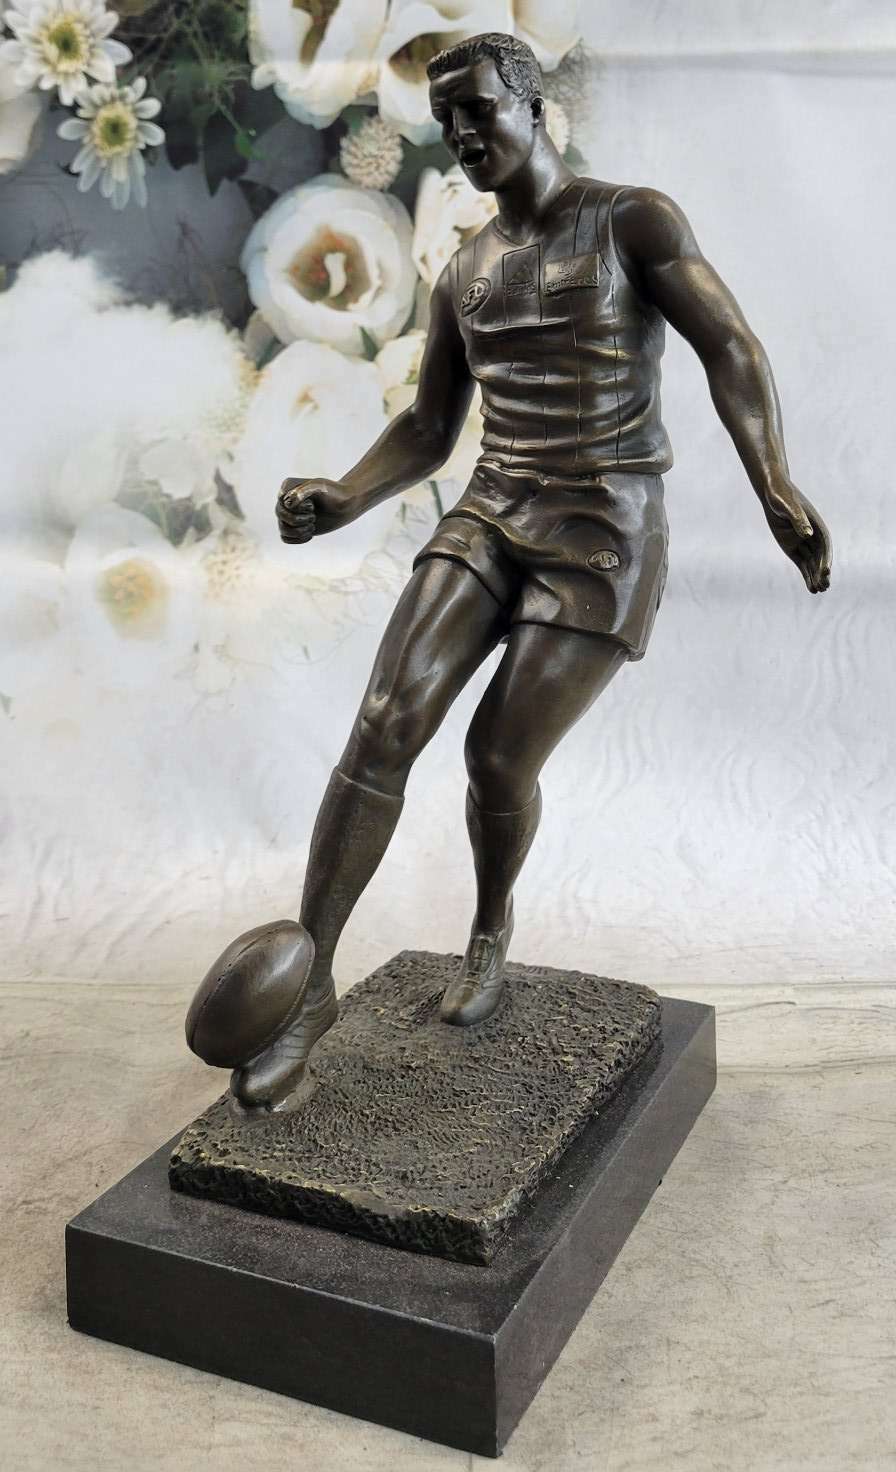 THE PERFECT KICK- Hot Cast Bronze RUGBY PLAYER Sculpture by M.Lopez DEAL